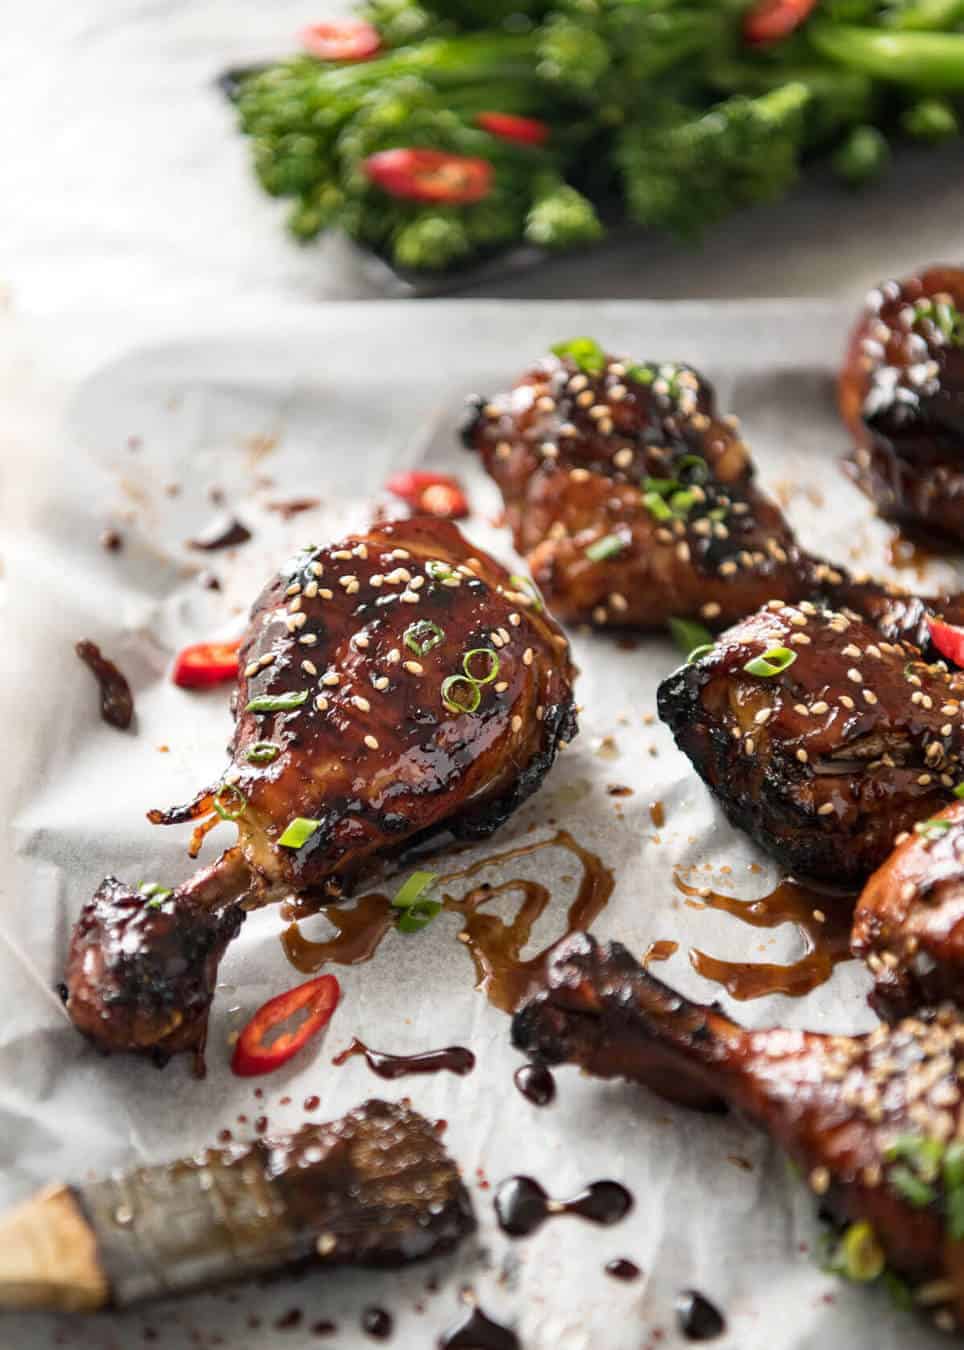 Sticky Chicken Drumsticks in Chinese Plum Sauce - Just a handful of ingredients, 5 minutes prep and awesome stickiness! www.recipetineats.com